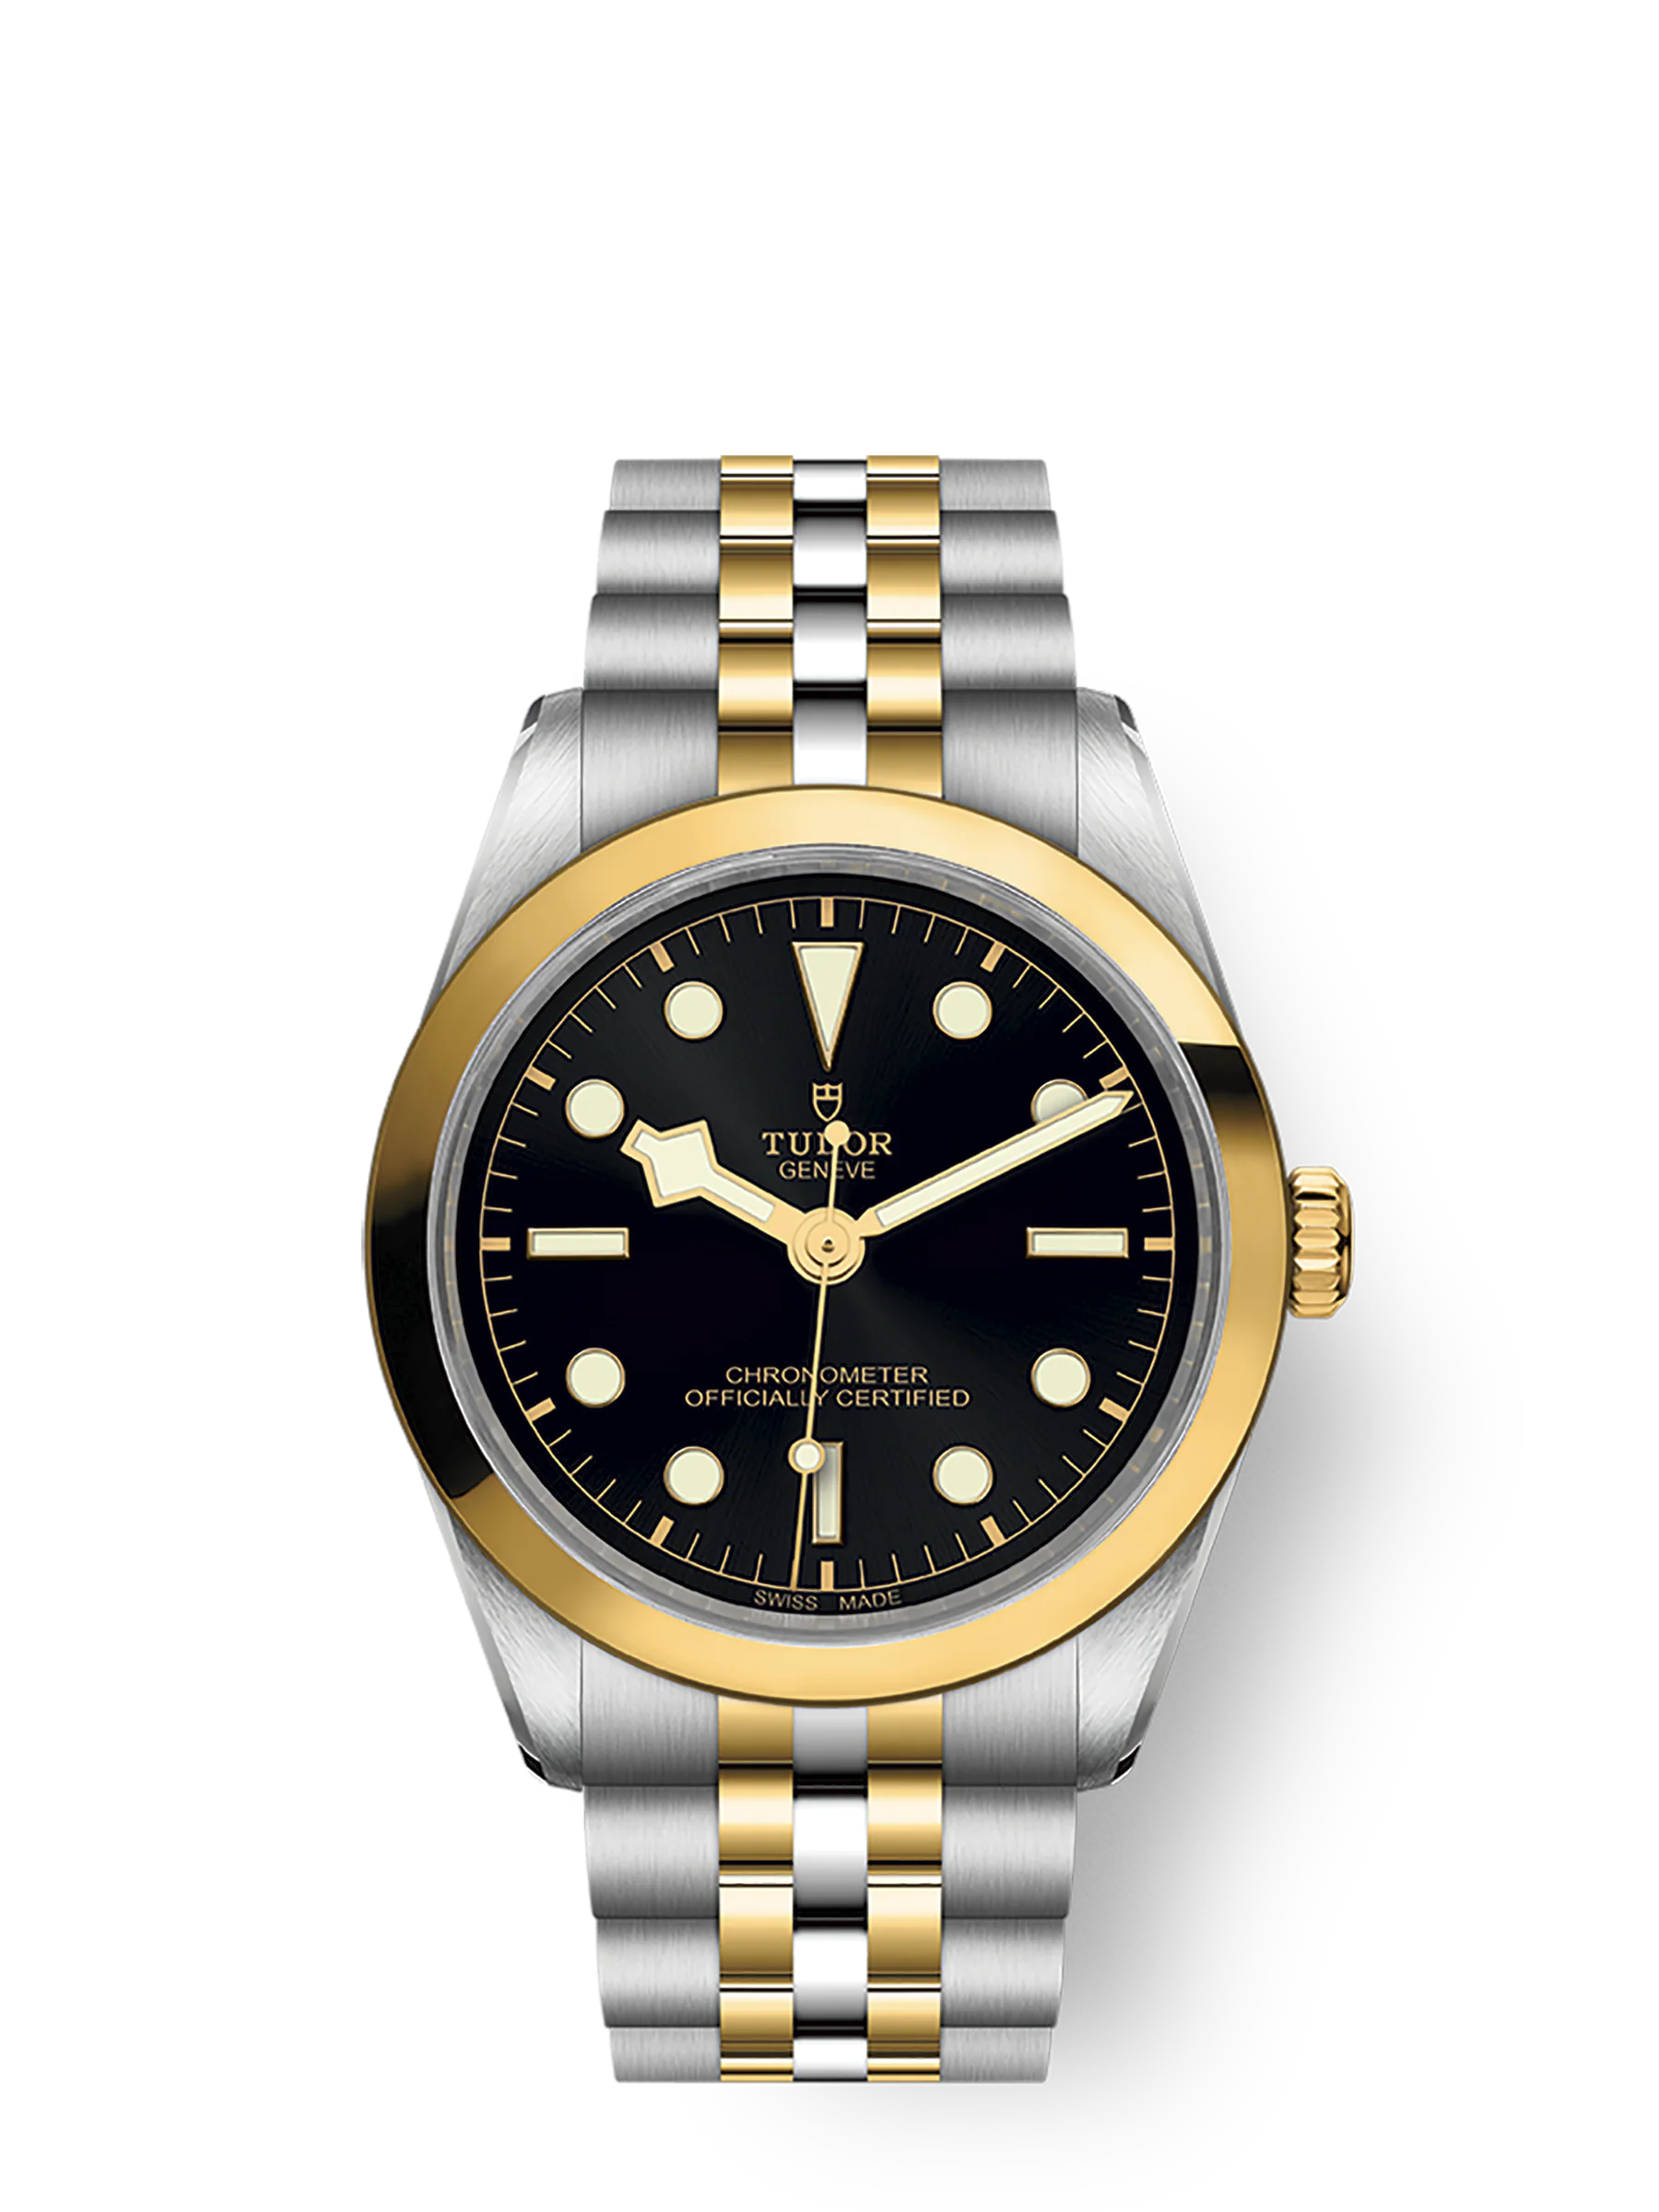 Tudor Black Bay 36 S&G, 316L Stainless Steel and 18k Yellow Gold, Ref# M79643-0001